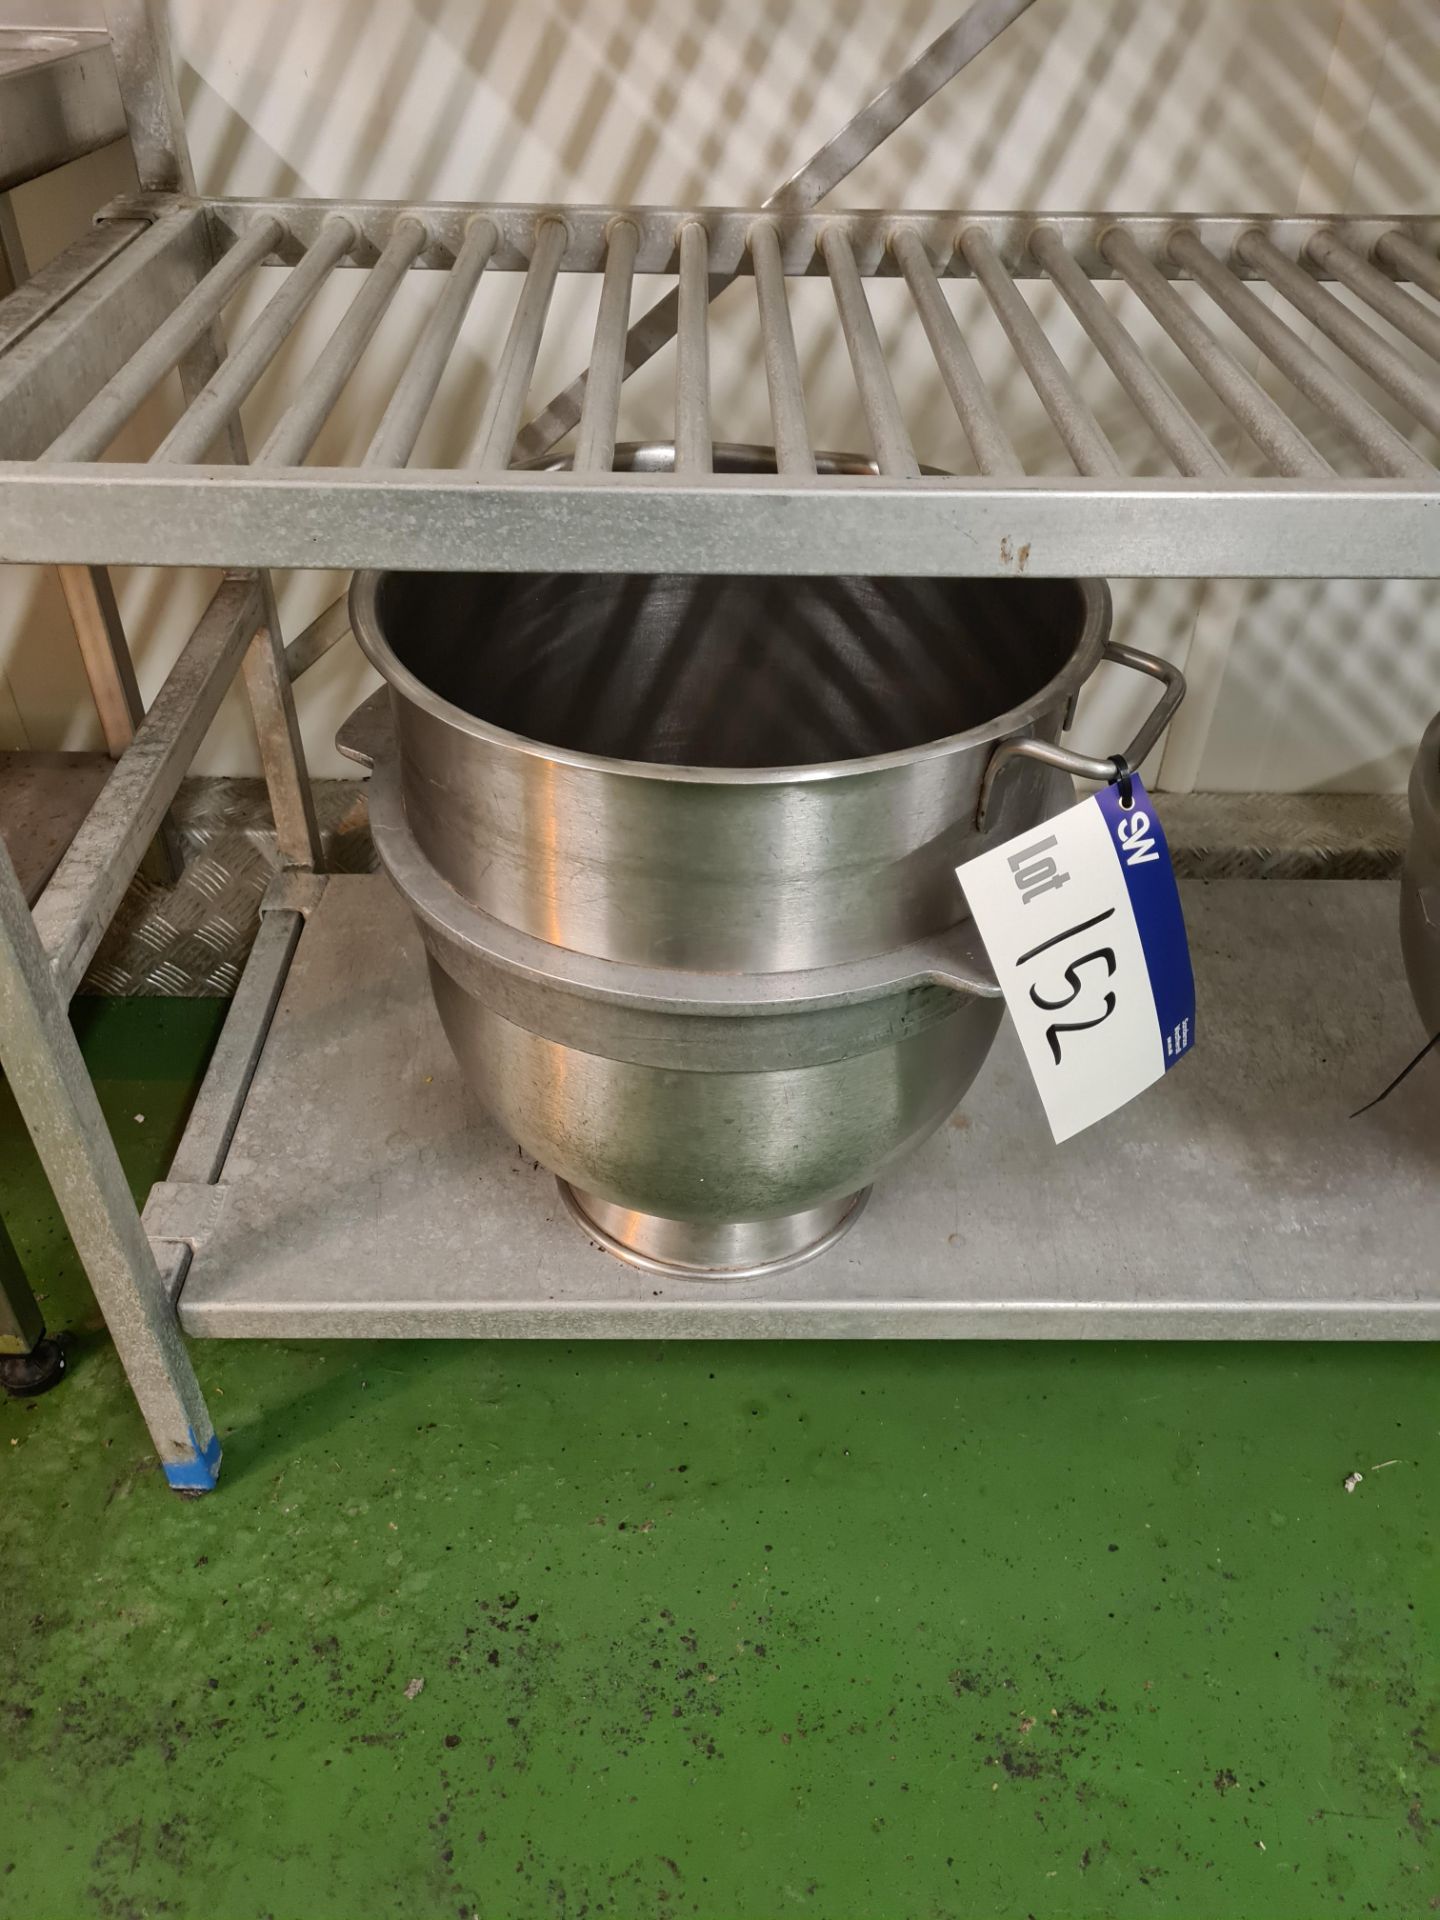 Stainless Steel Mixer Bowl, Approx. 0.4m Diameter x 0.45m Height